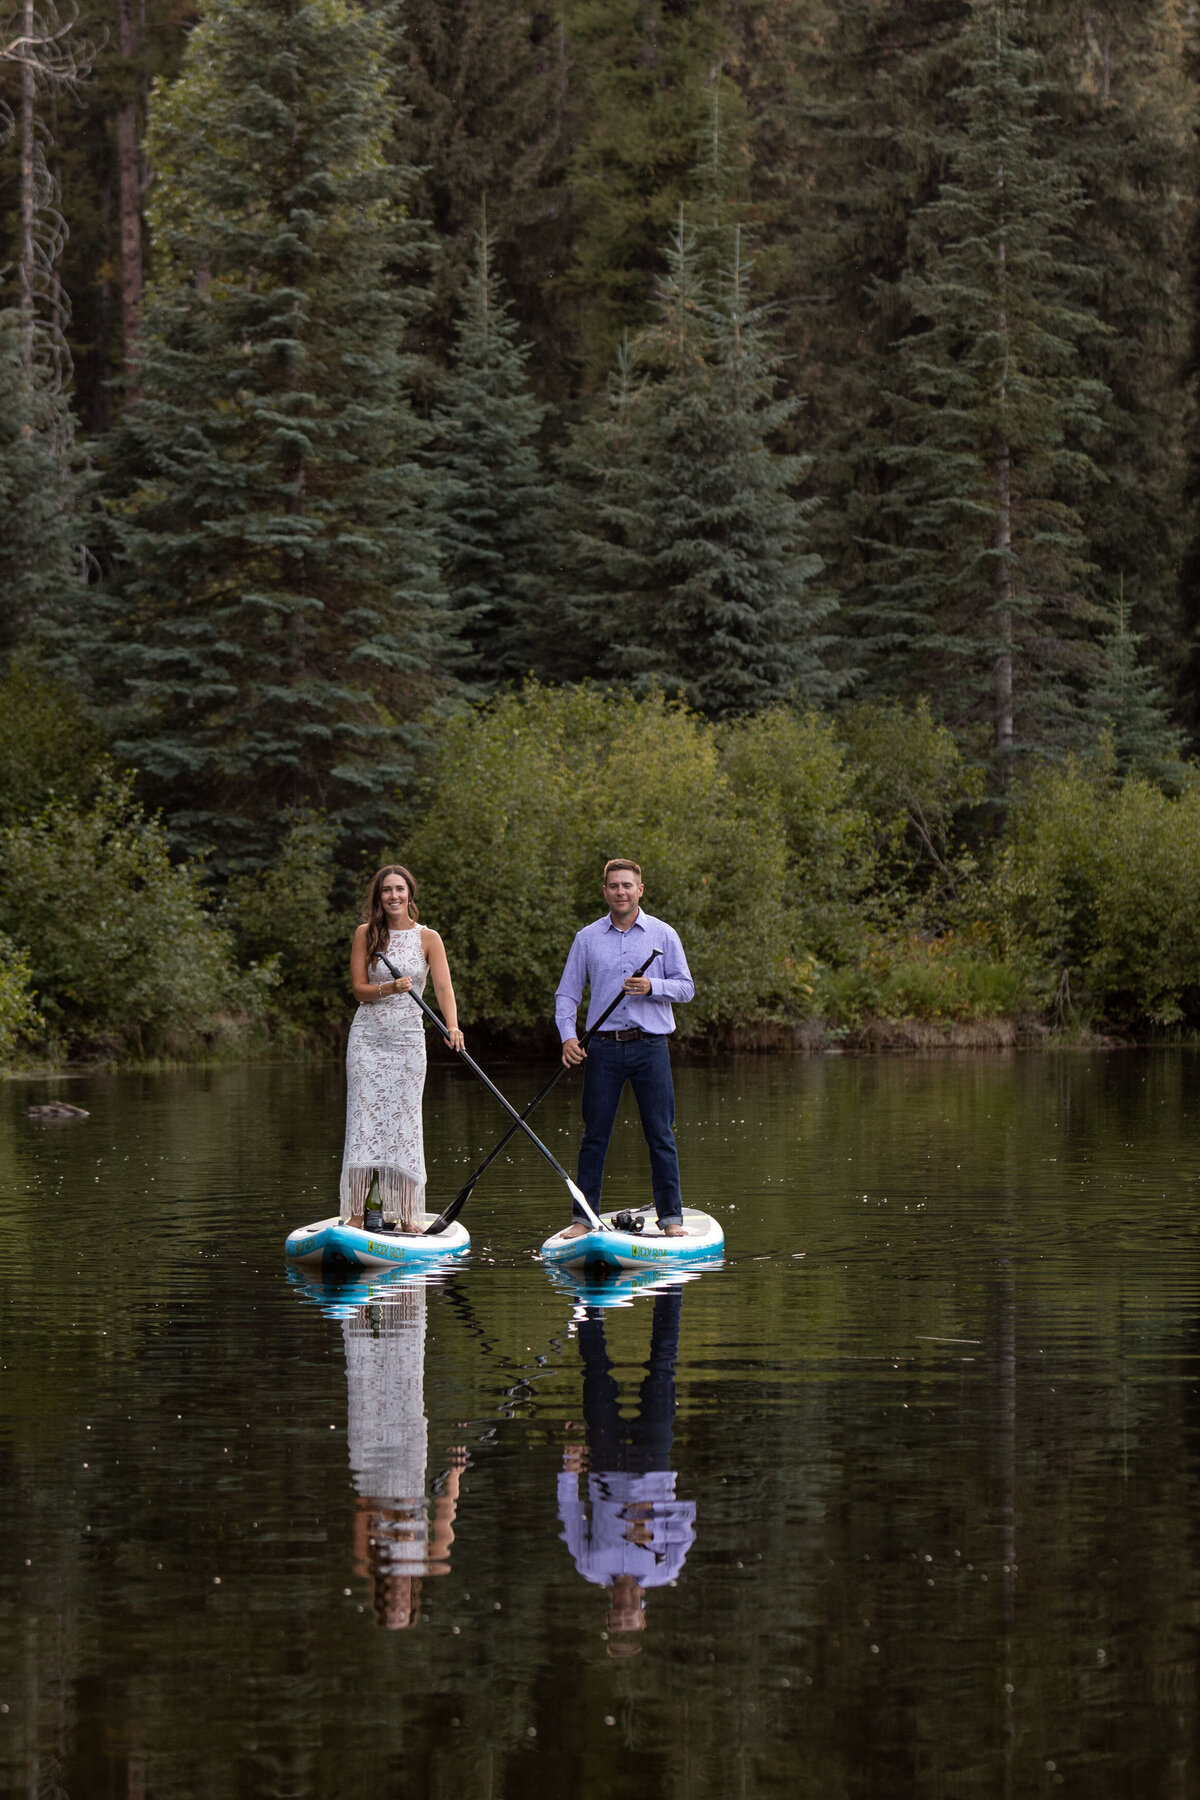 A bride and groom stand on paddle boards in the middle of a lake with their paddles crossed across each other's board.